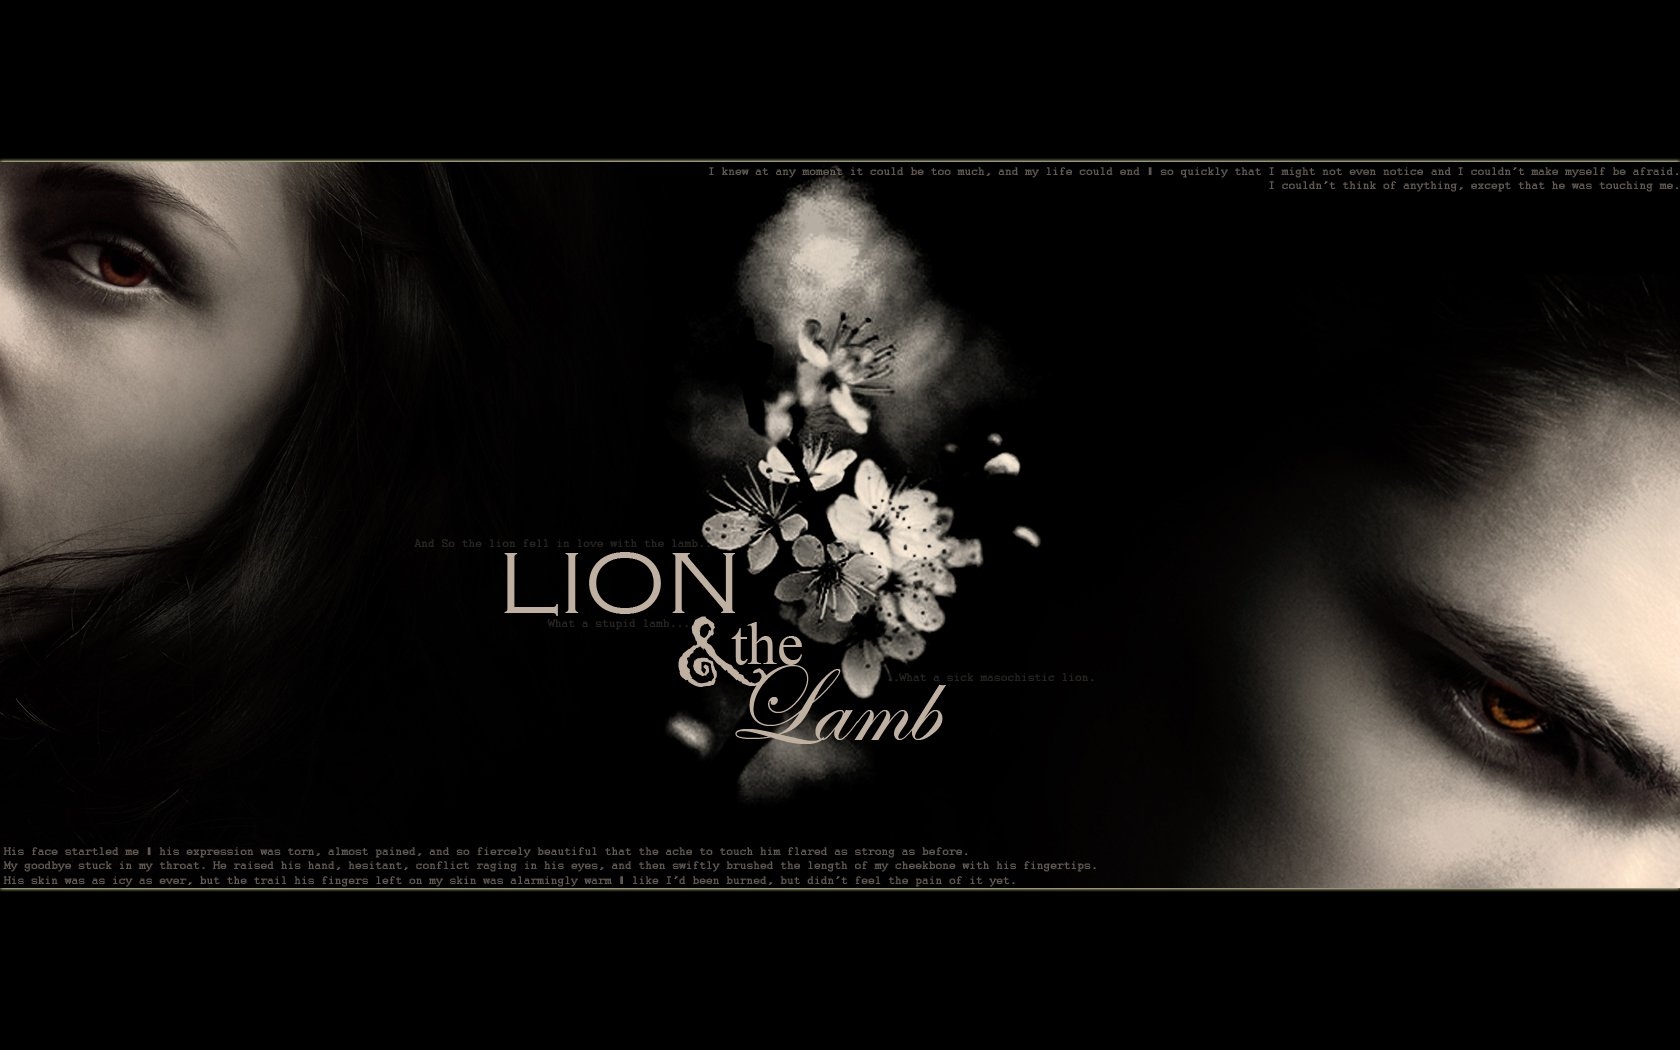 The-Lion-And-The-Lamb-twilight-series-8897480-1680-1050 -  